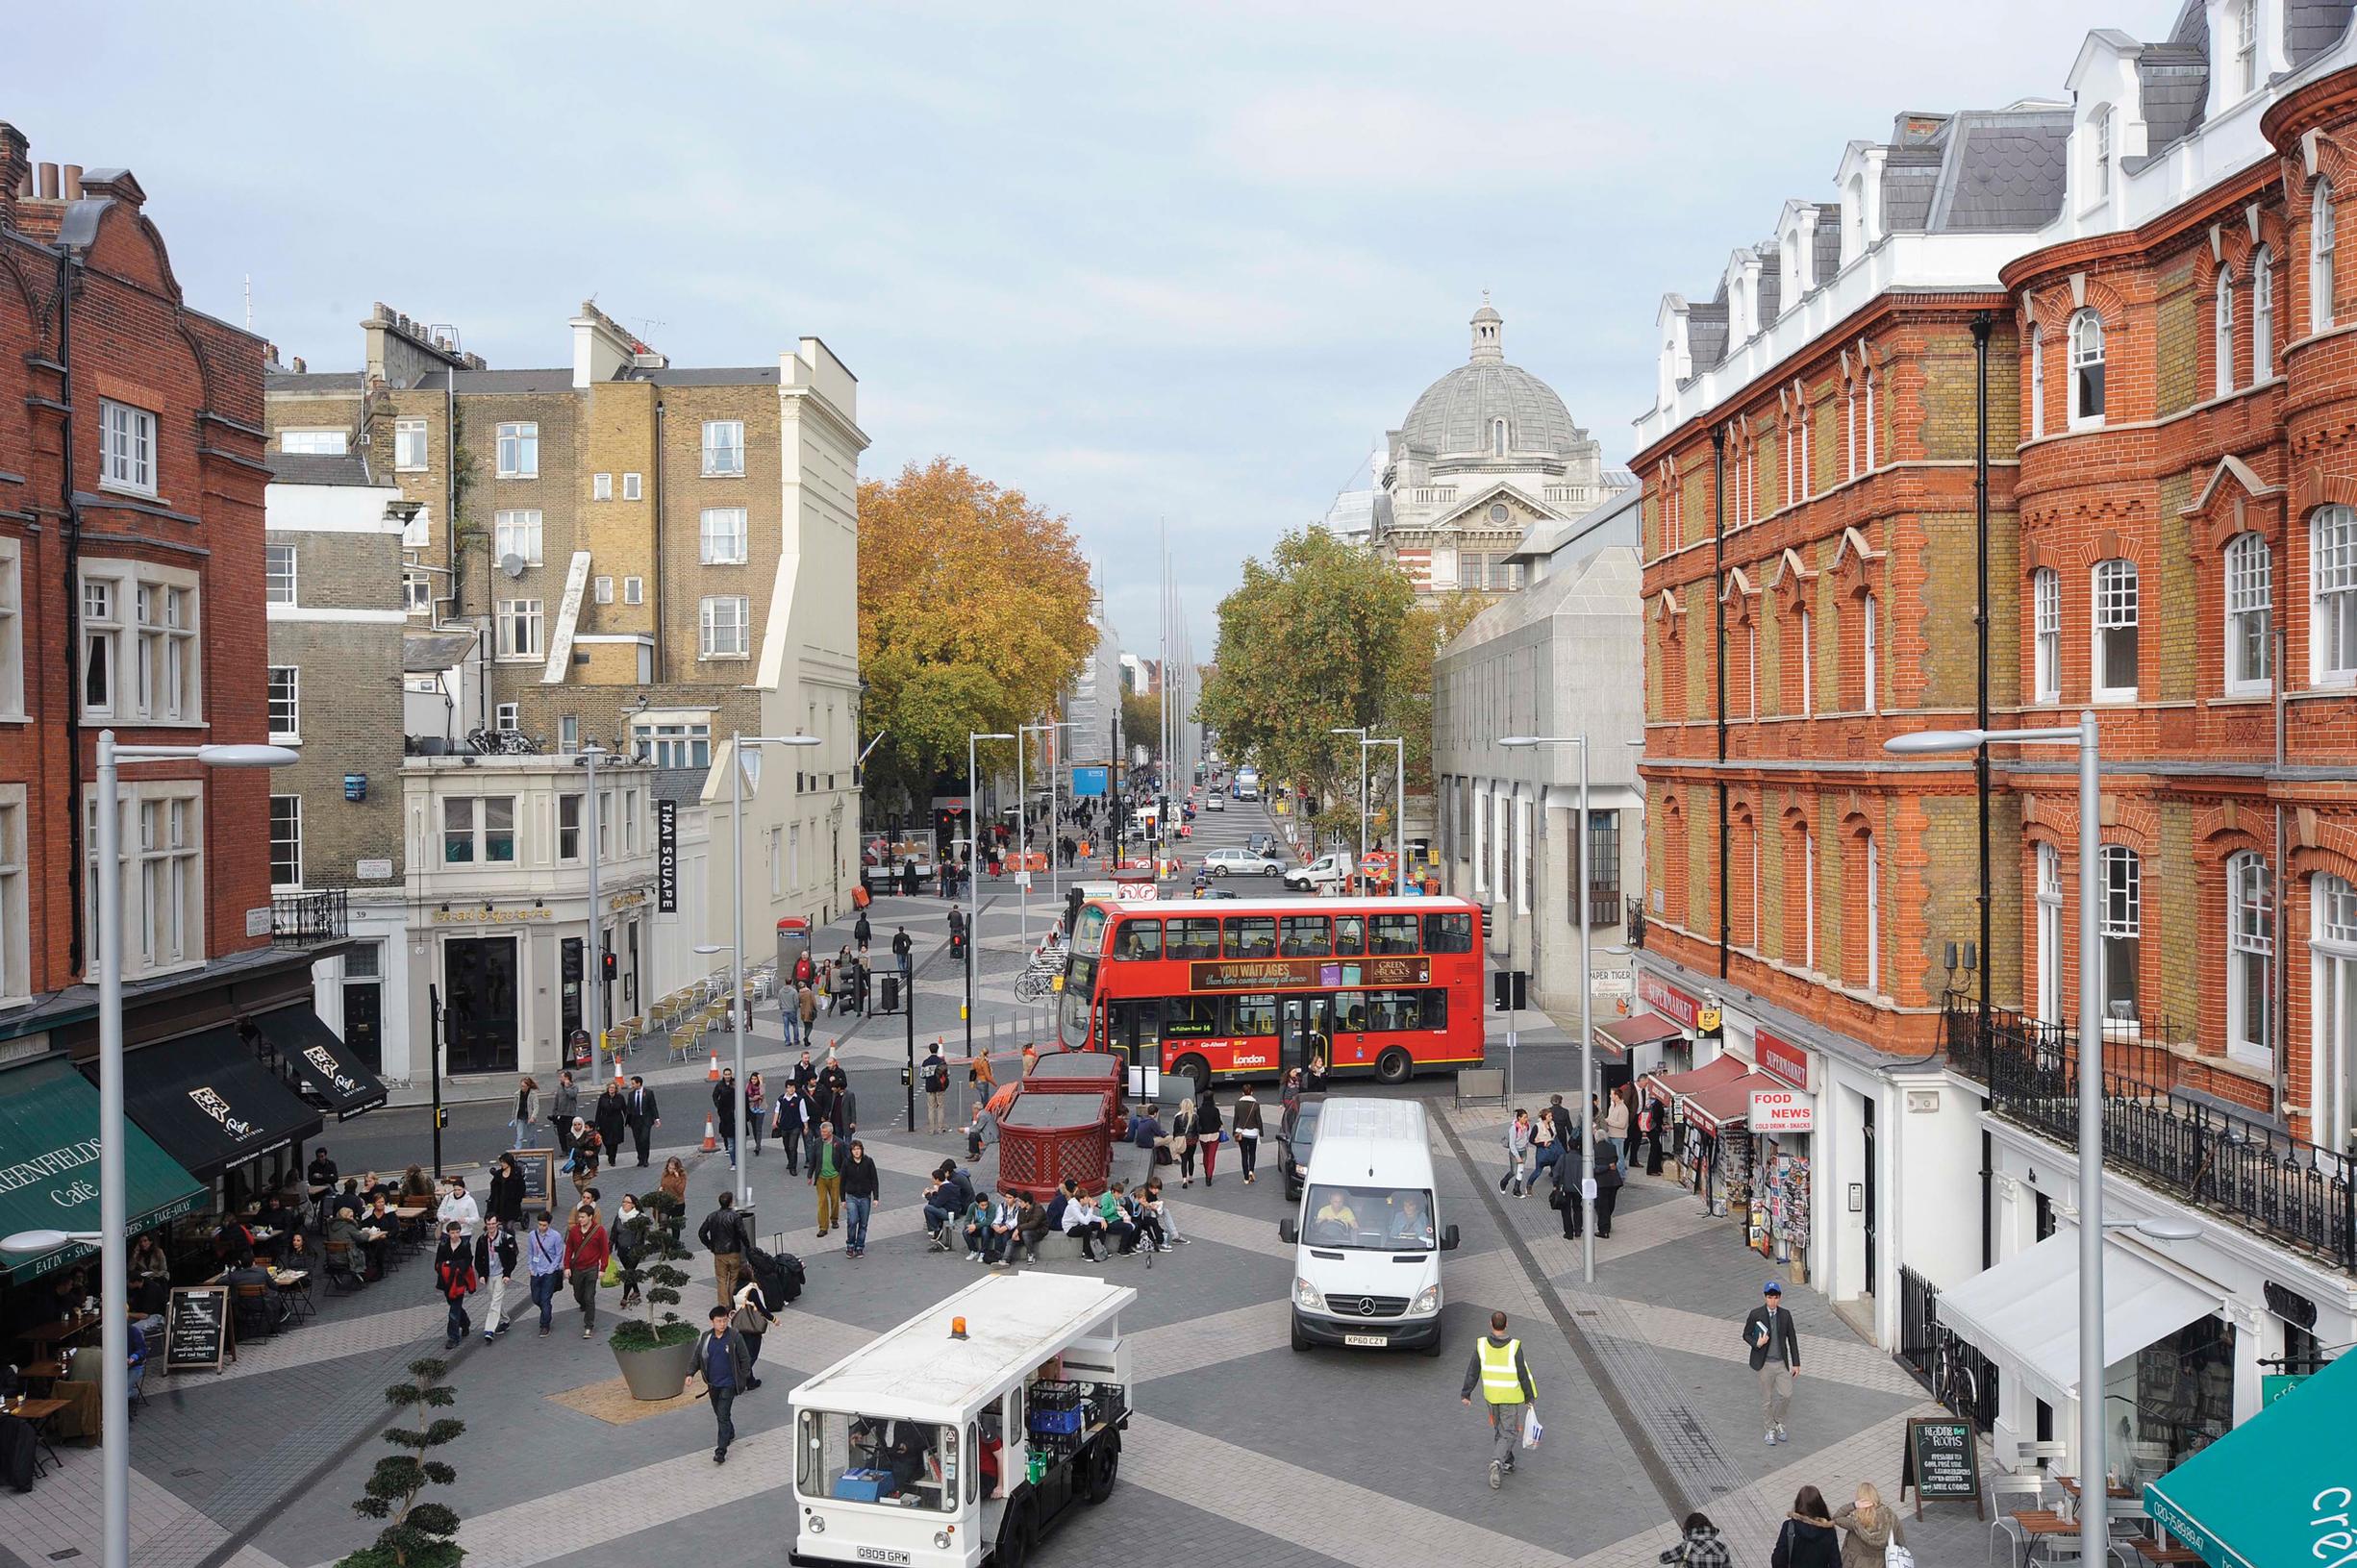 Exhibition Road: a ‘pedestrian-prioritised street’